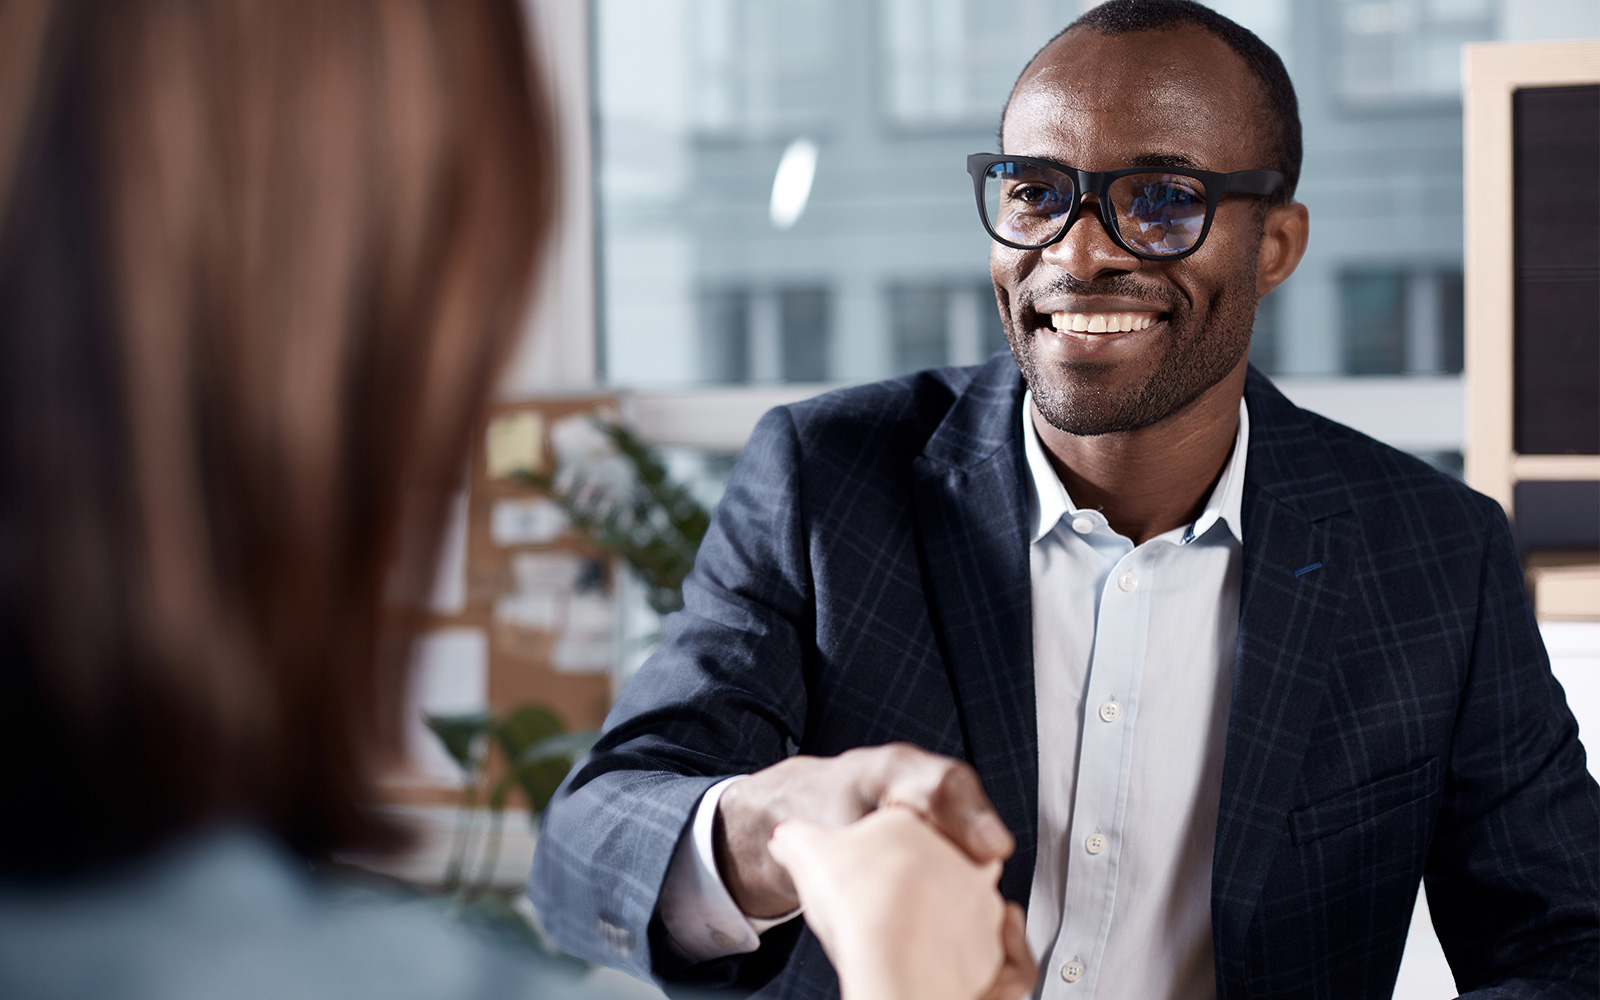 Manager in glasses is sitting at table and having firm handshake with Client